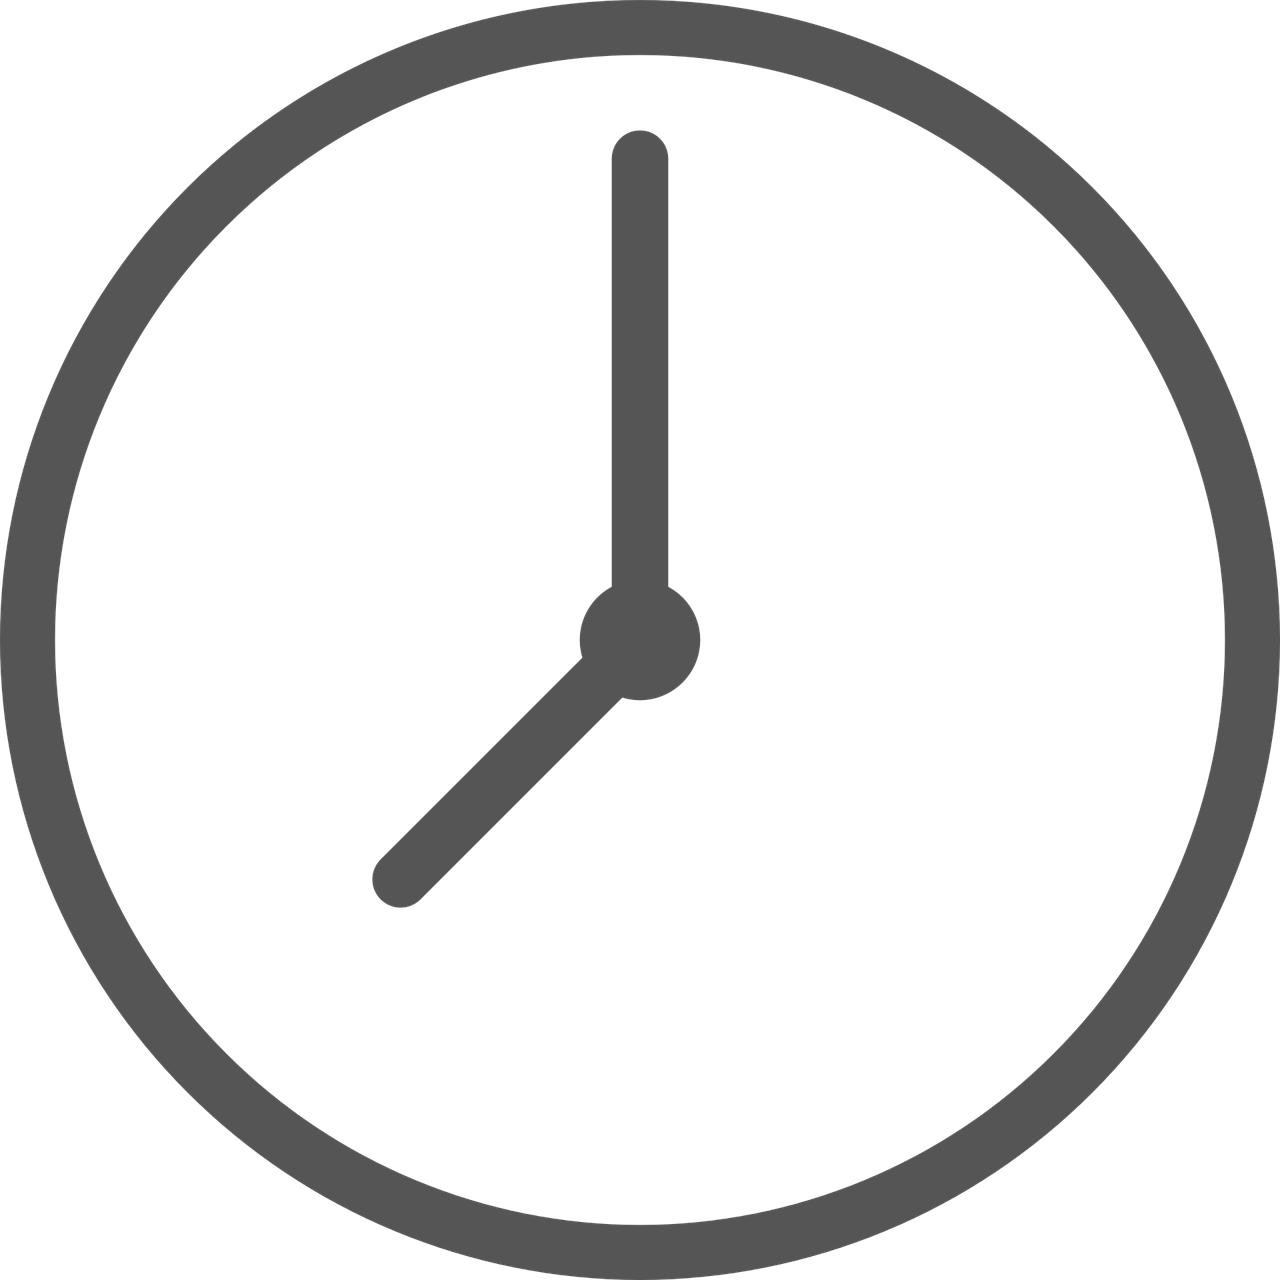 a clock icon on a black background, by Andrei Kolkoutine, medium, thick outline, grey shift, 2 0 5 6 x 2 0 5 6